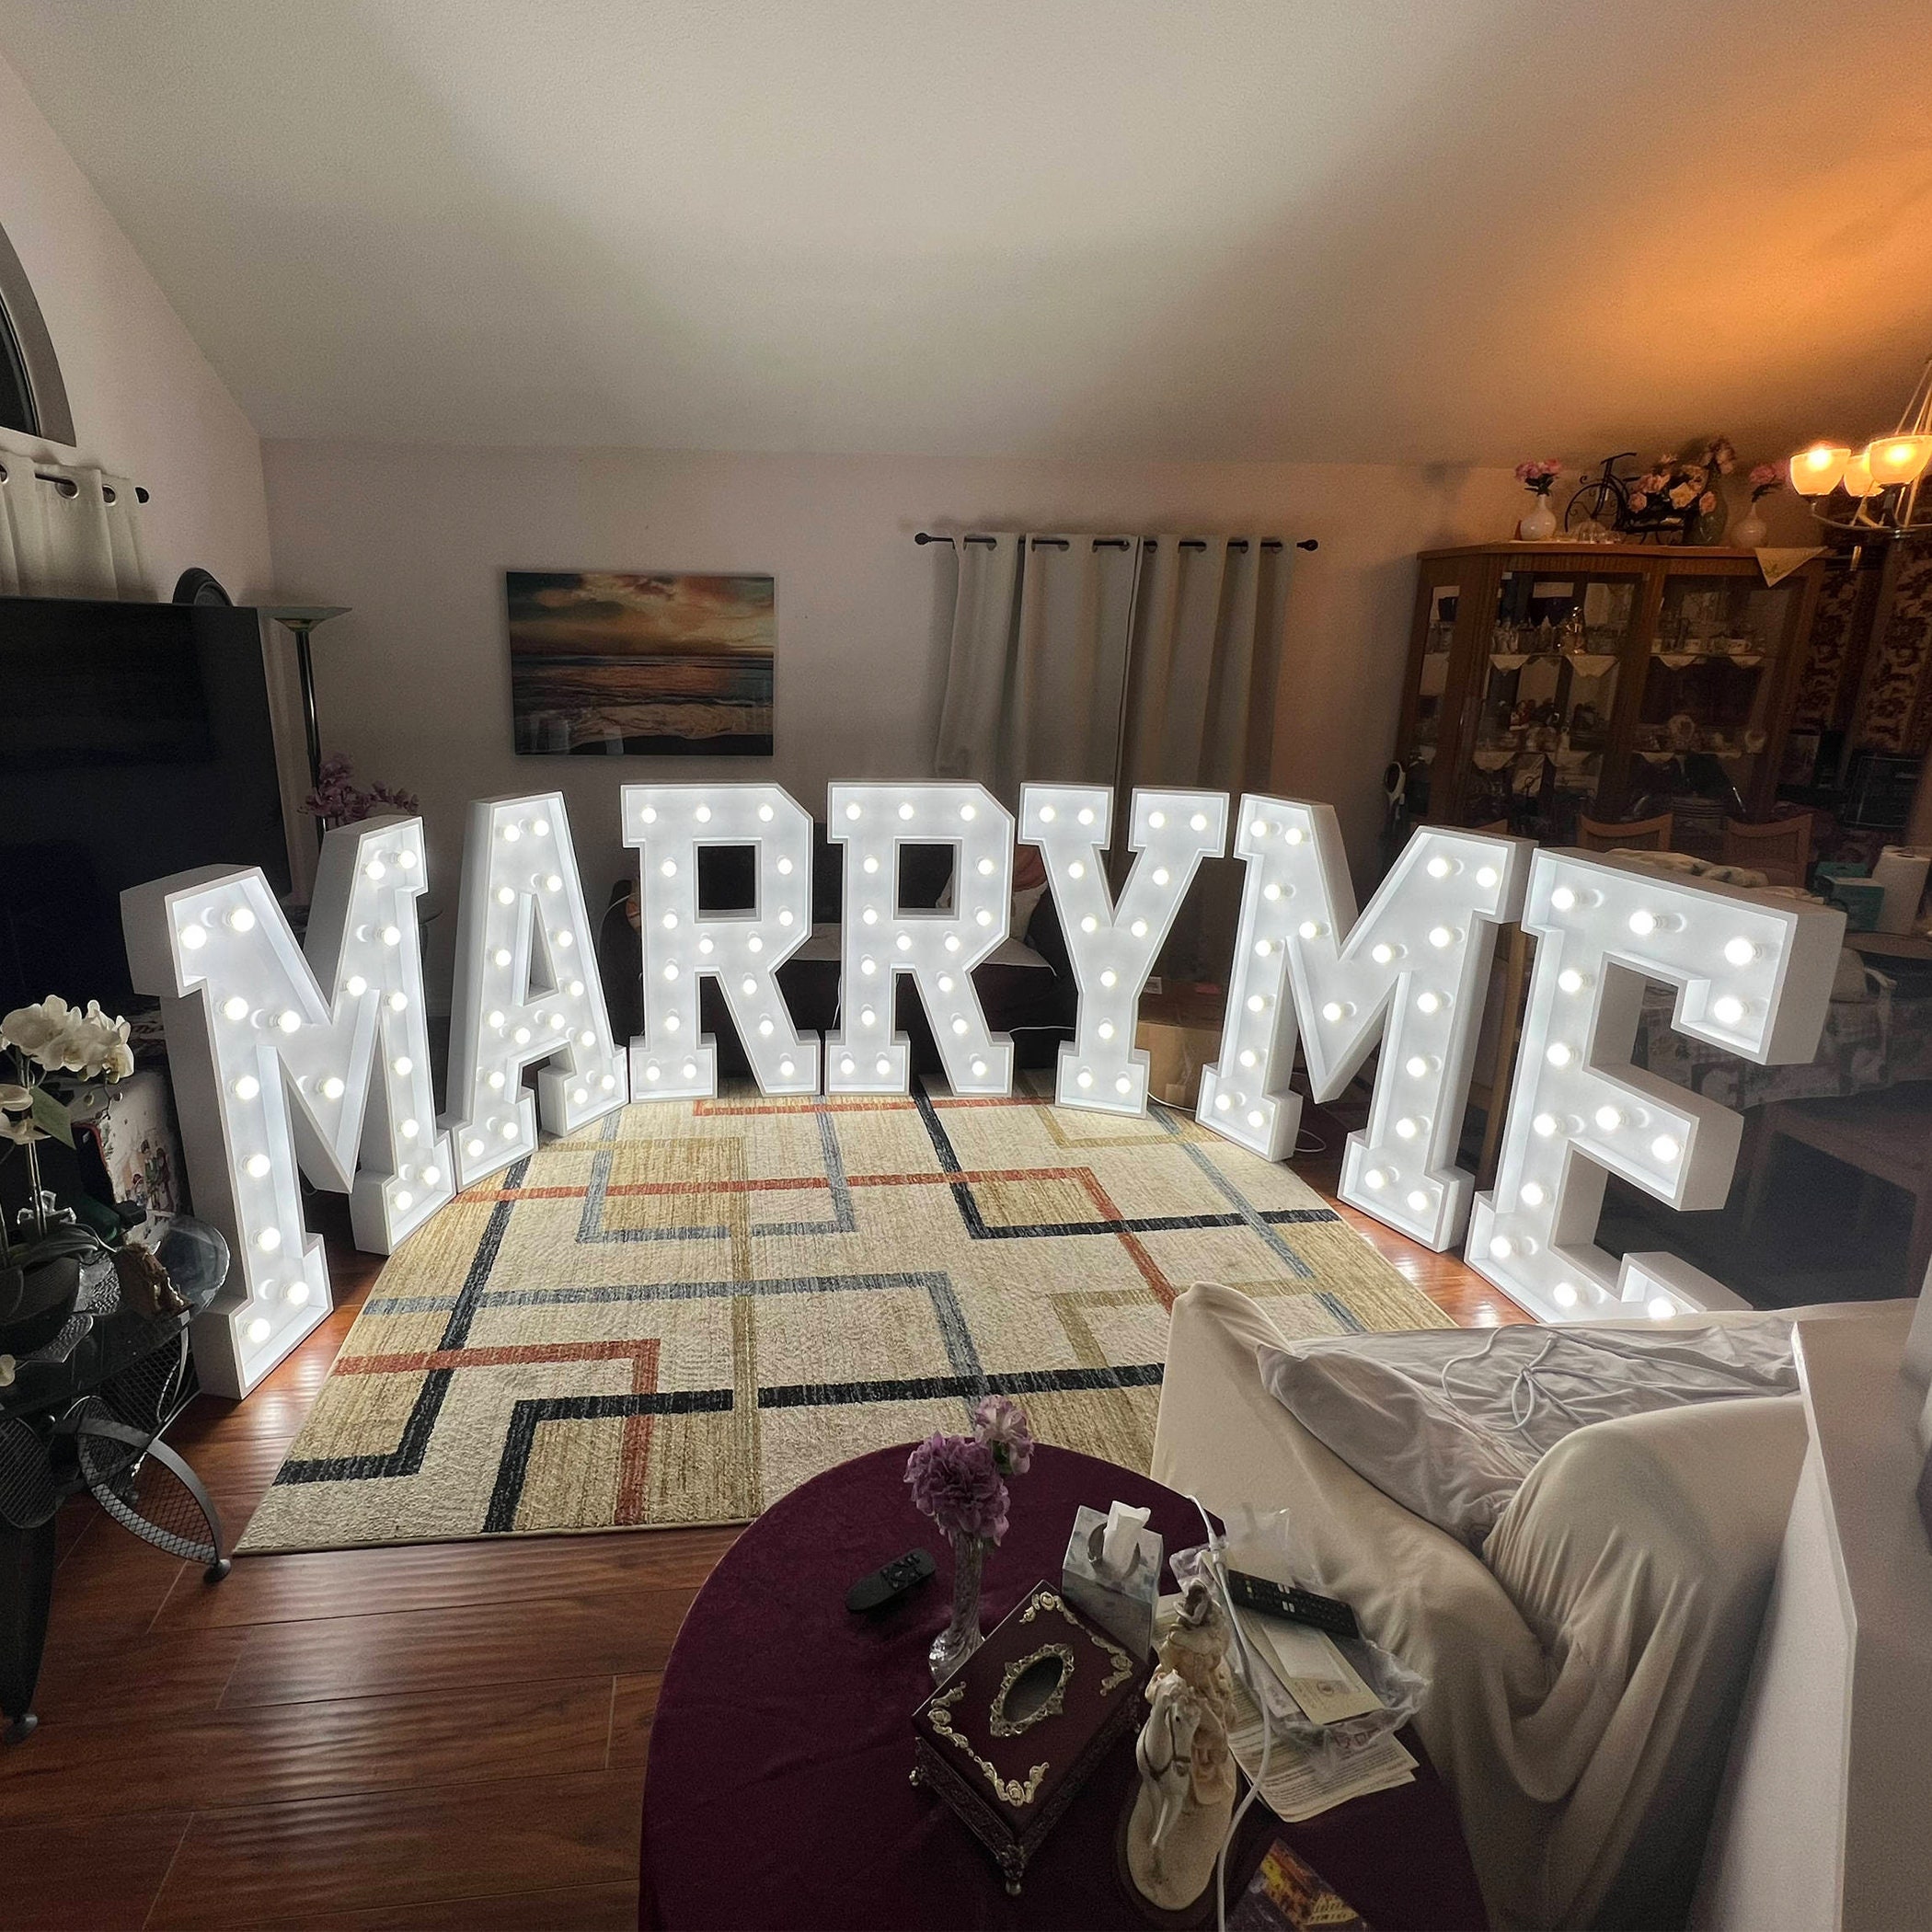 Walfront Light Up Letter X Lamp Indoor English Alphabet Wall Hanging Decor  for Wedding Birthday Party Decoration Light Fixtures Warm White, Indoor